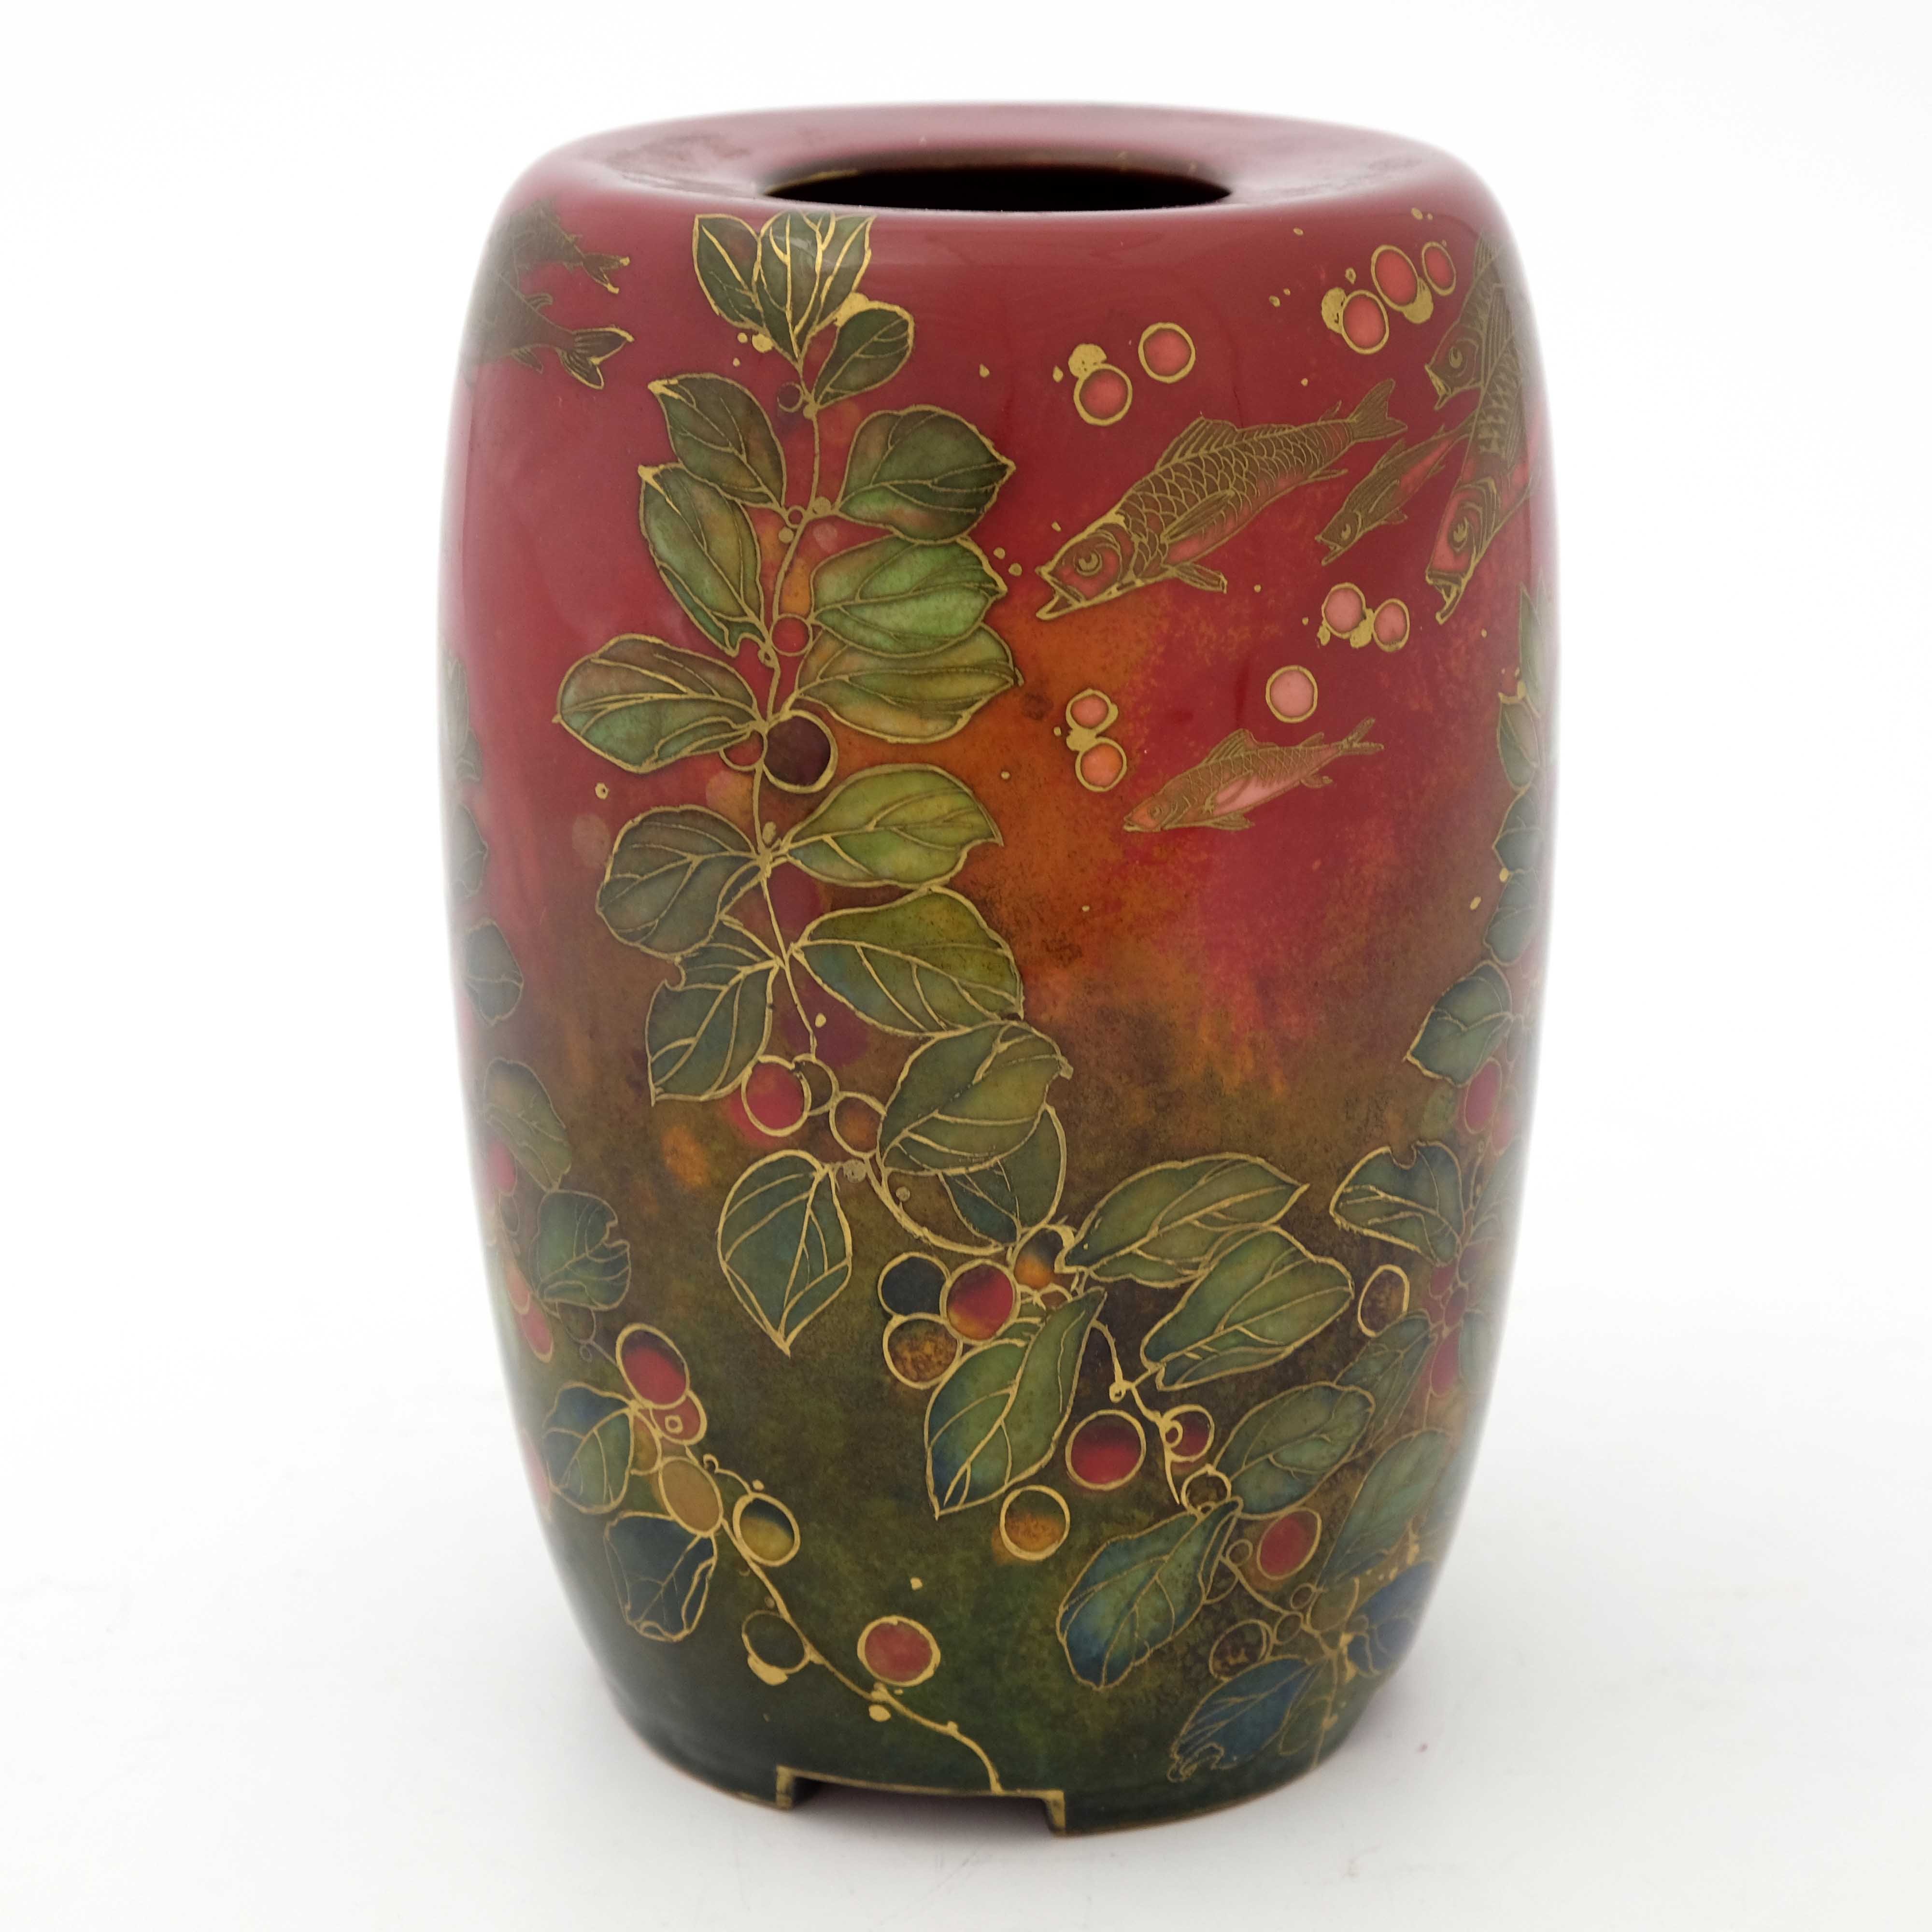 Harry Nixon for Royal Doulton, a Flambe vase - Image 2 of 5